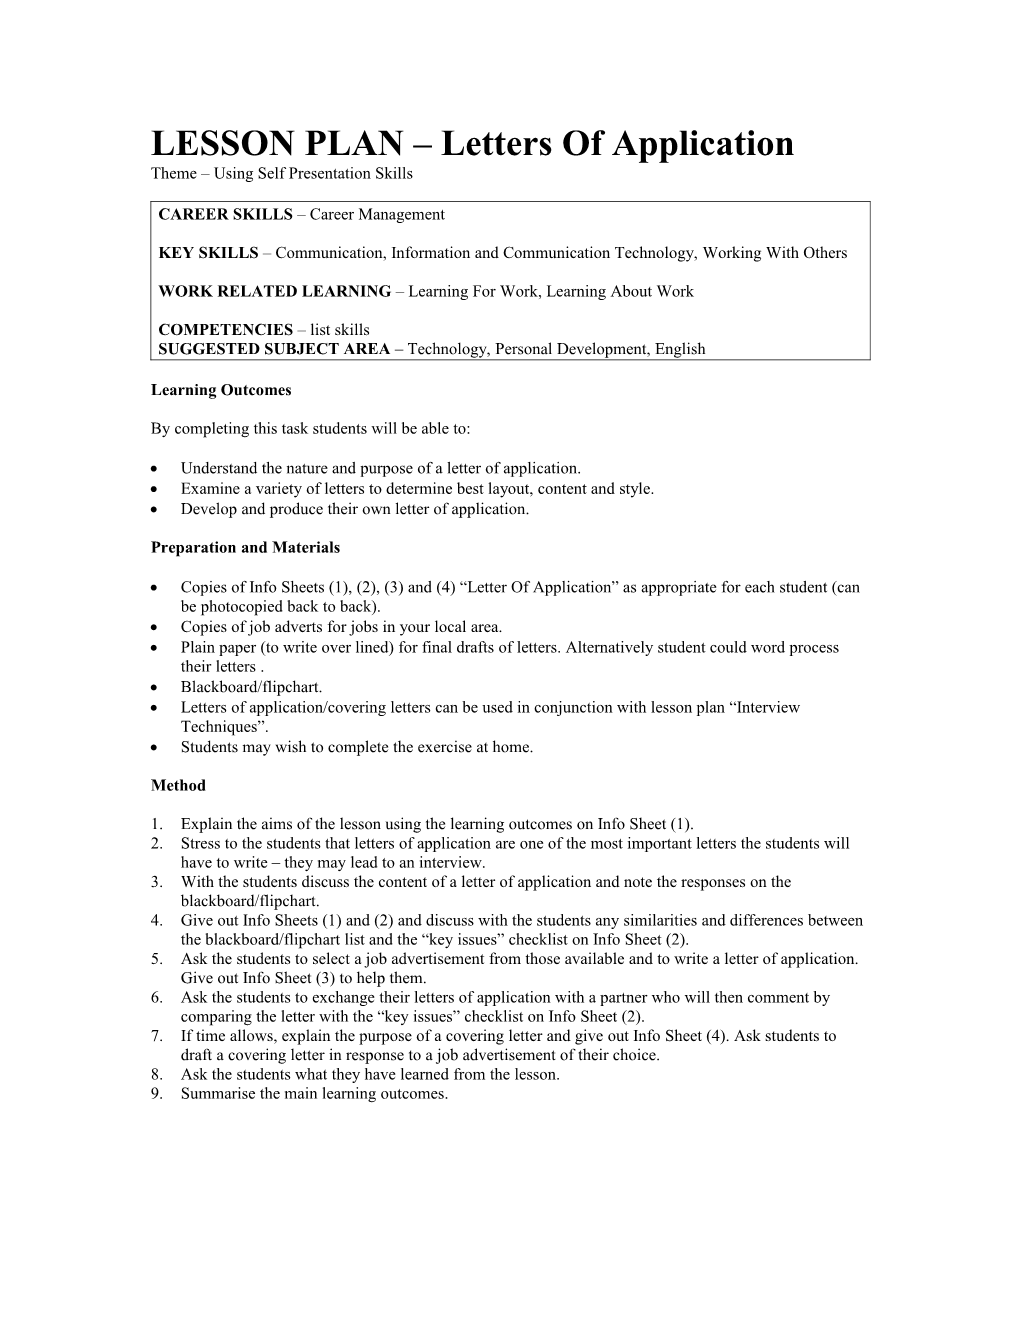 LESSON PLAN Letters of Application